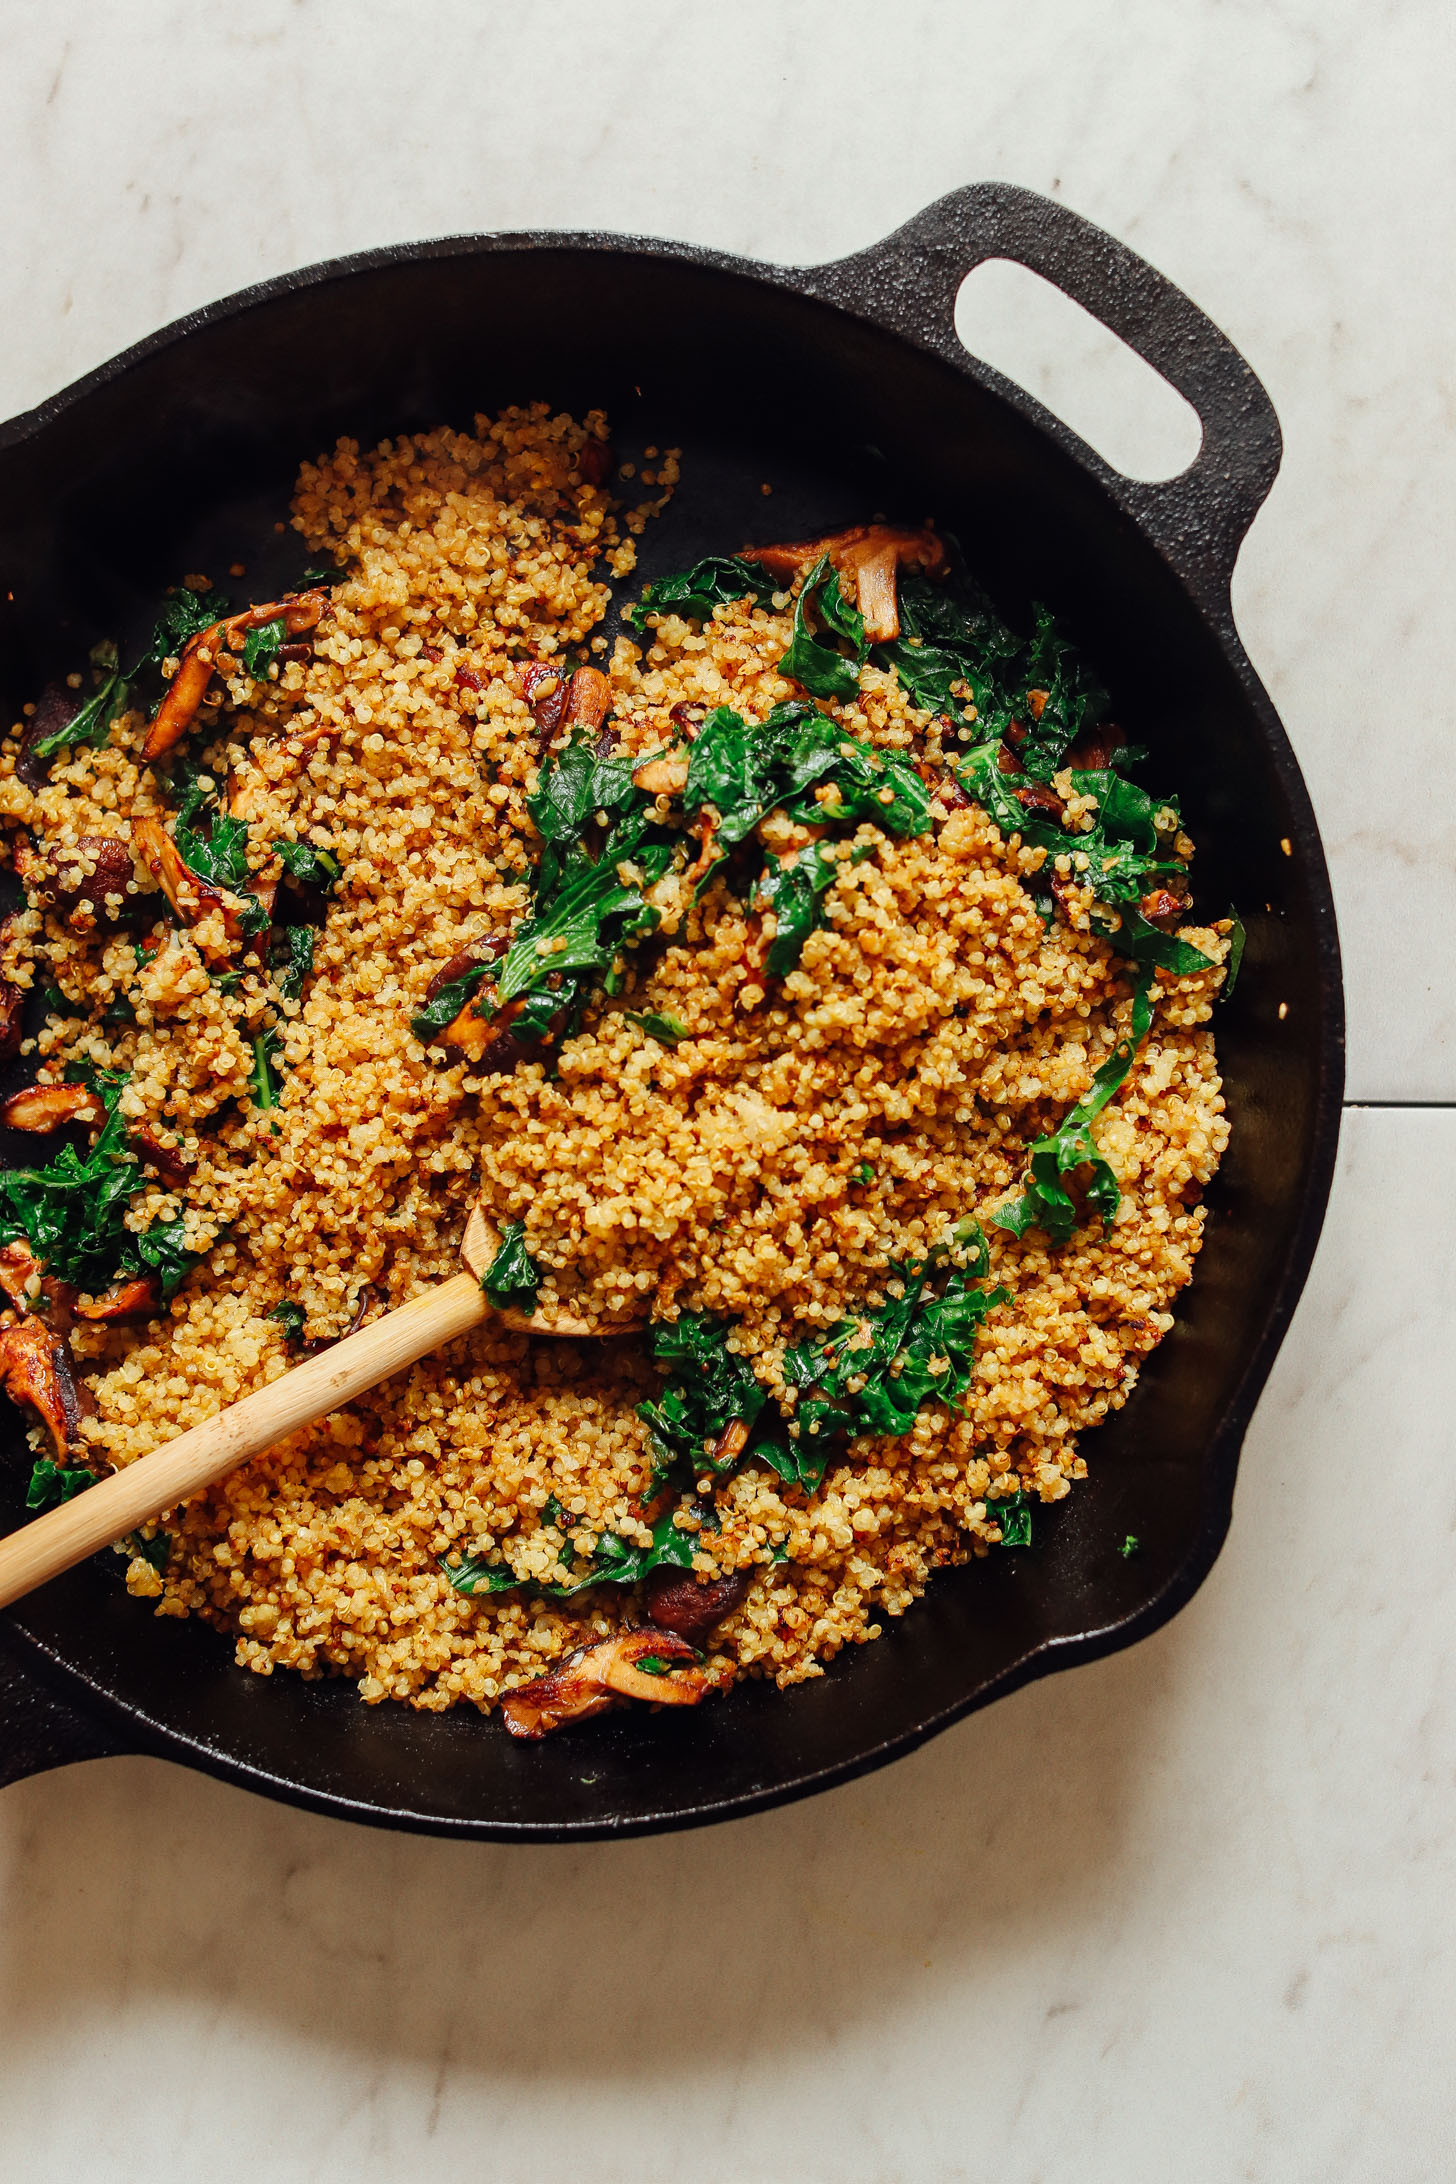 Cooking quinoa, mushrooms, and kale in a cast-iron skillet for our vegan stuffed butternut squash recipe